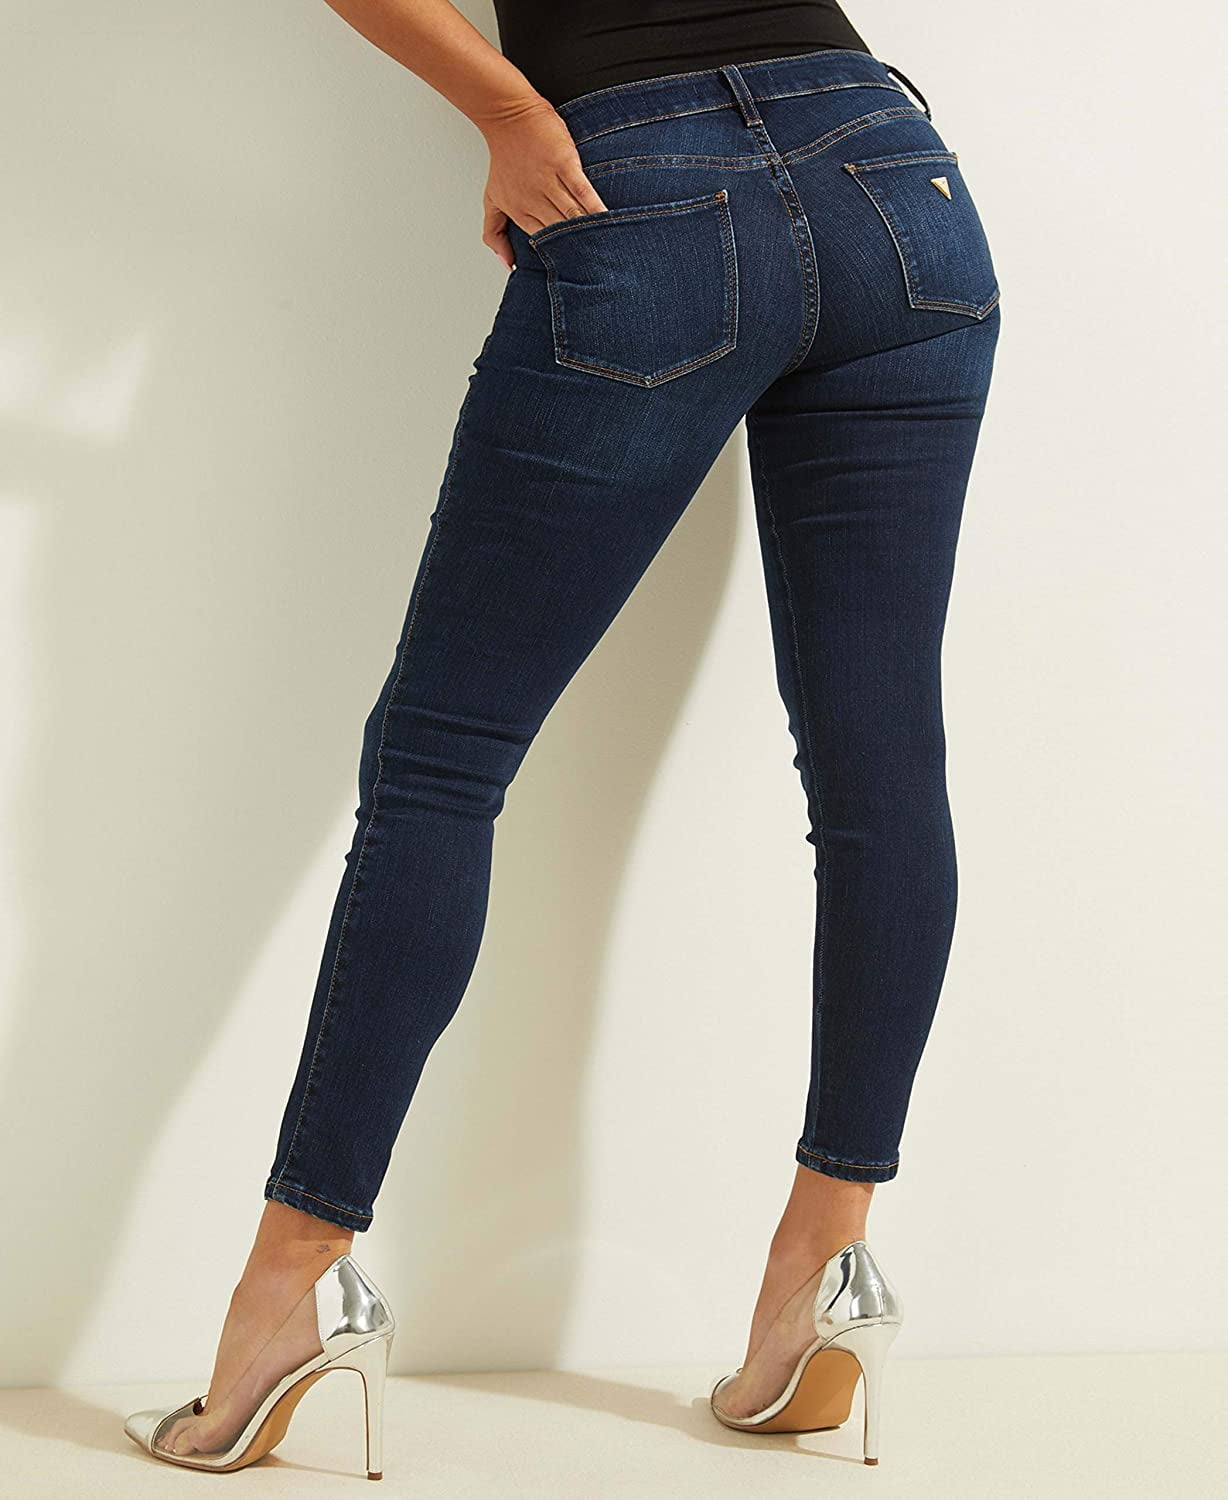 GUESS Womens Sexy Curve Mid-Rise Stretch Skinny Fit Jean 28